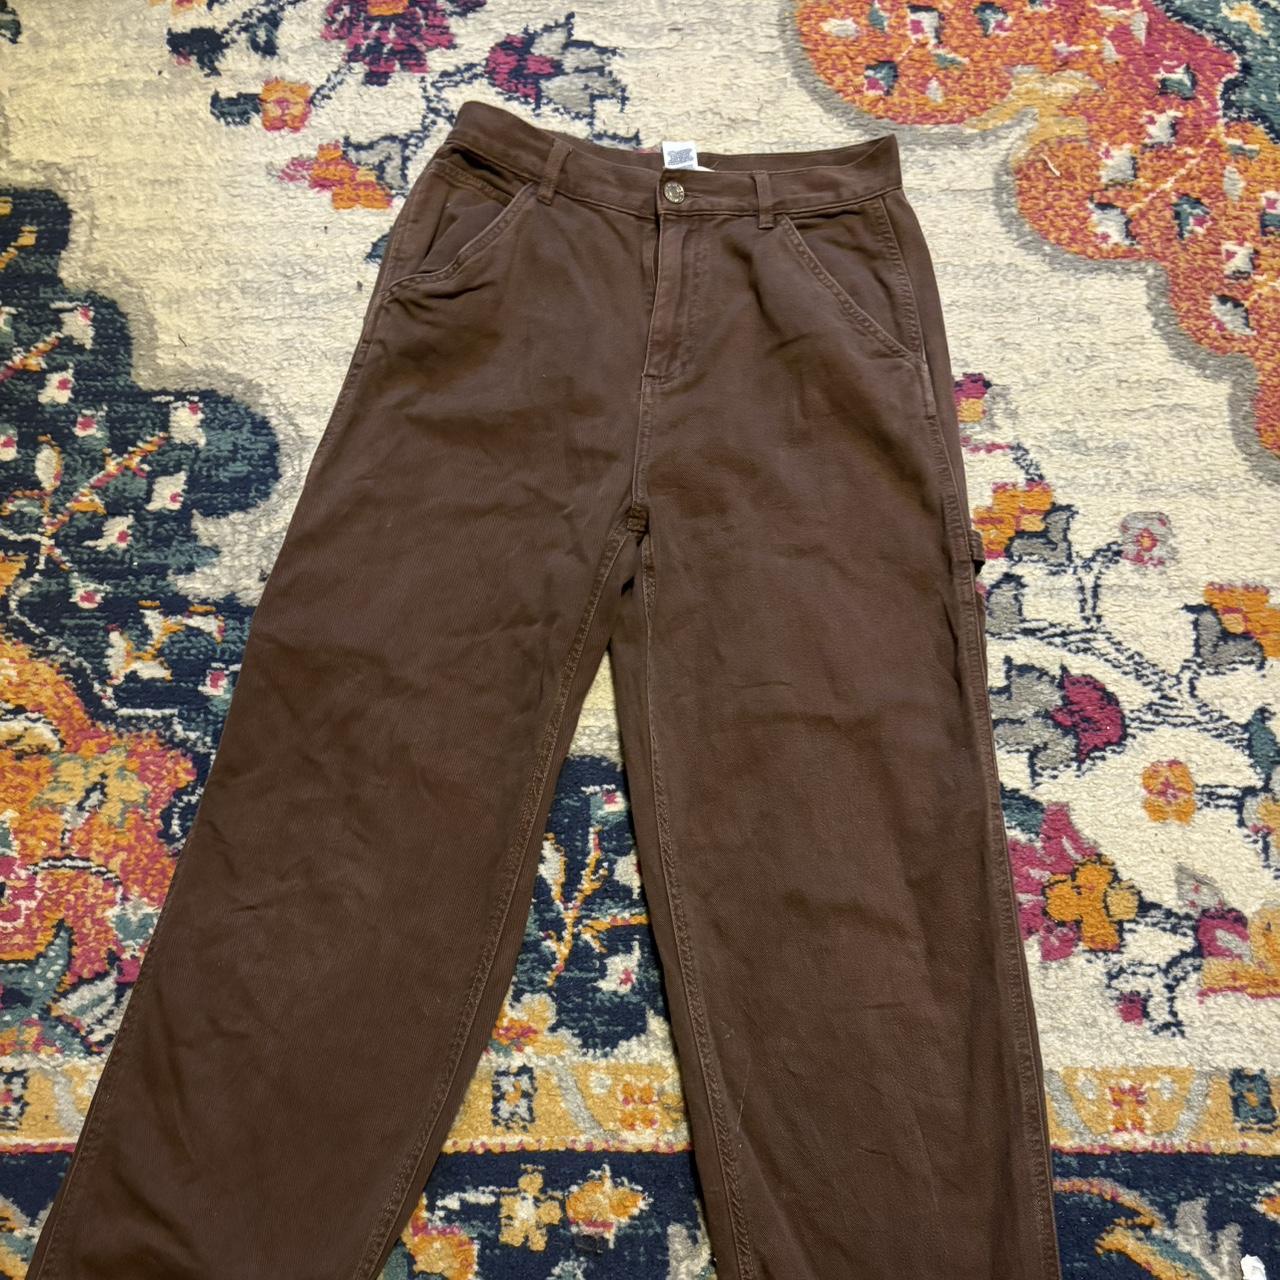 Brown cargos from garage. Size 5. Super cute and... - Depop